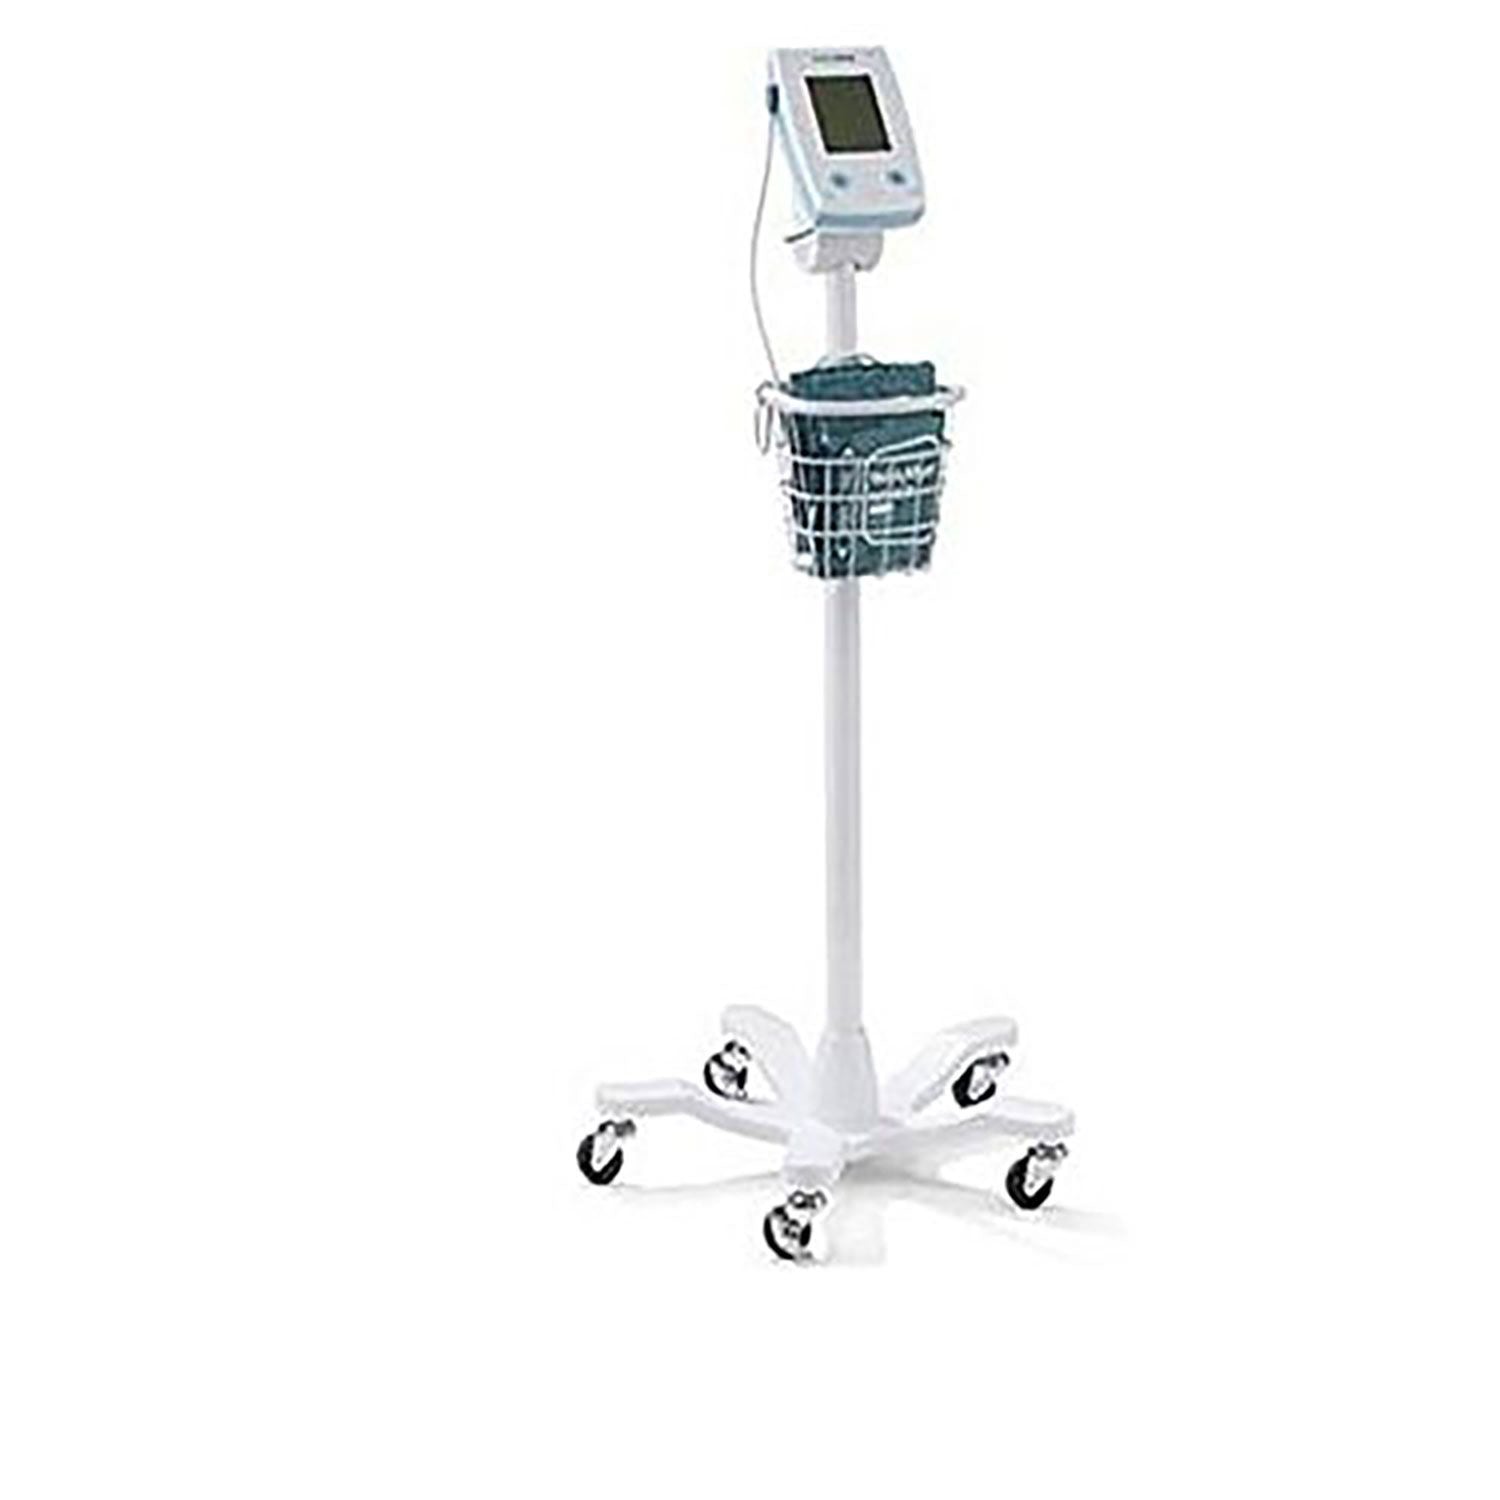 Mobile Stand for ProBP 2400